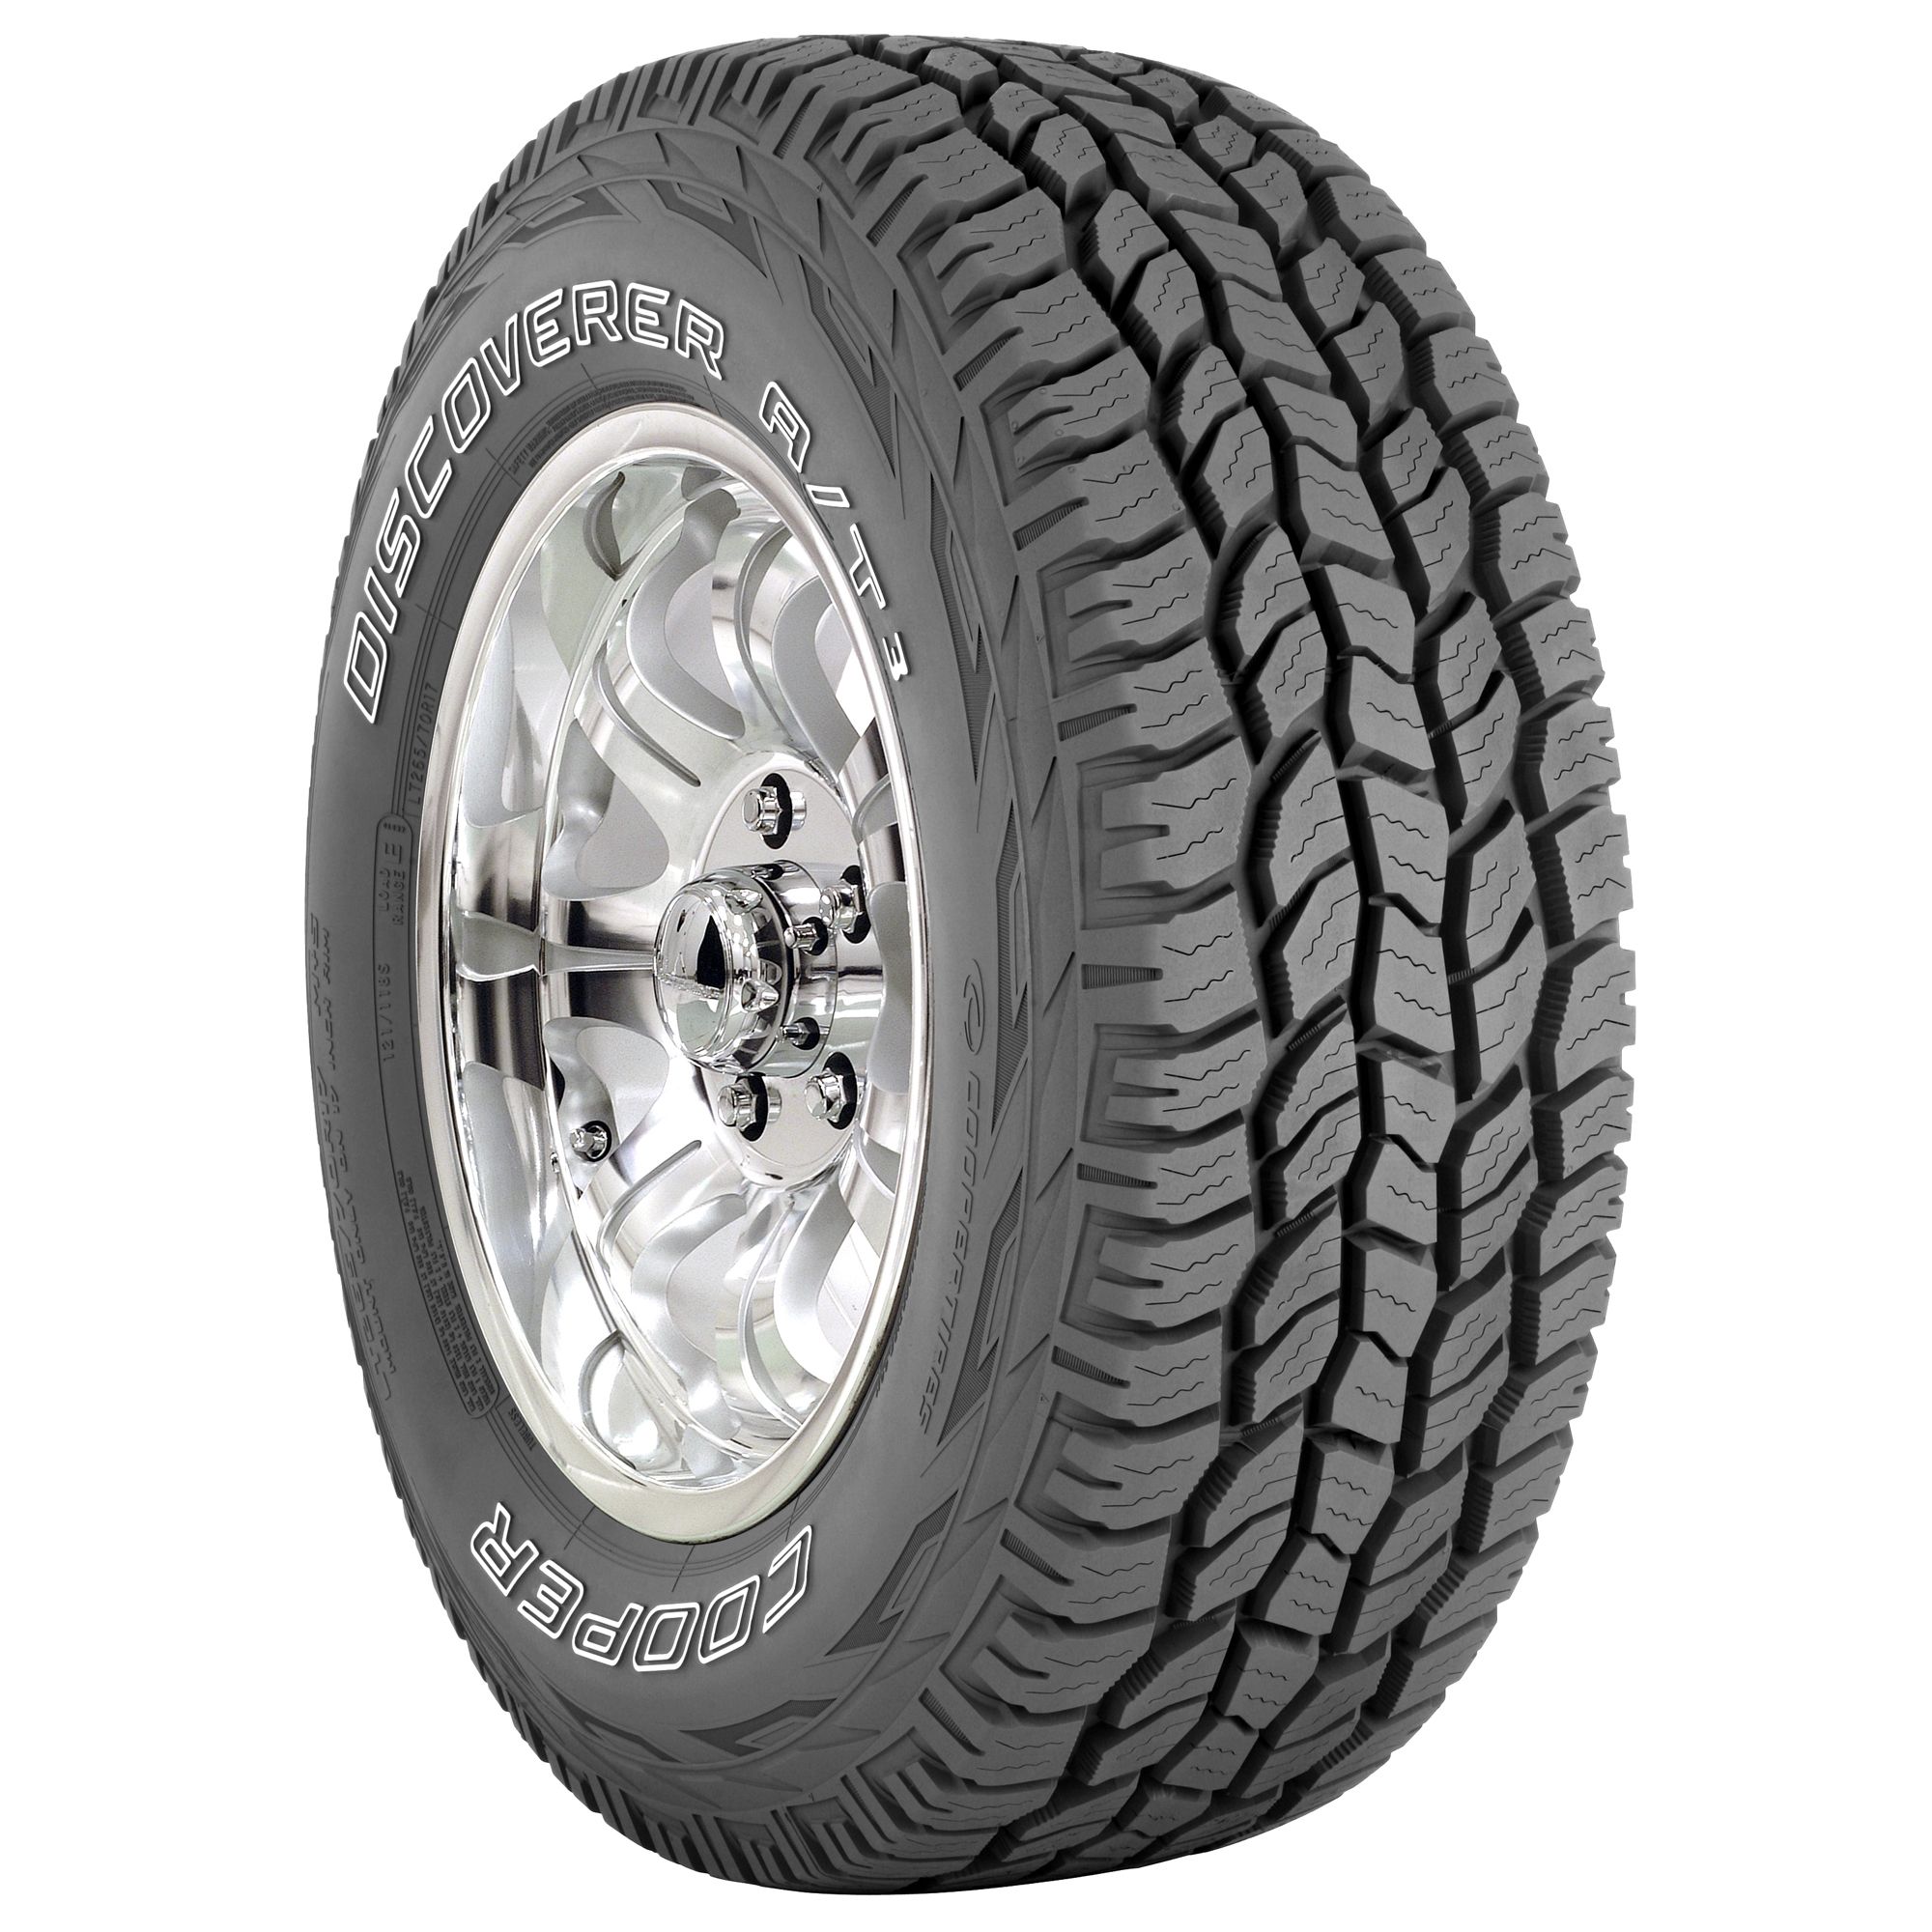 0029142737537 - DISCOVERER A/T3 - 255/75R17 115T OWL - ALL SEASON TIRE